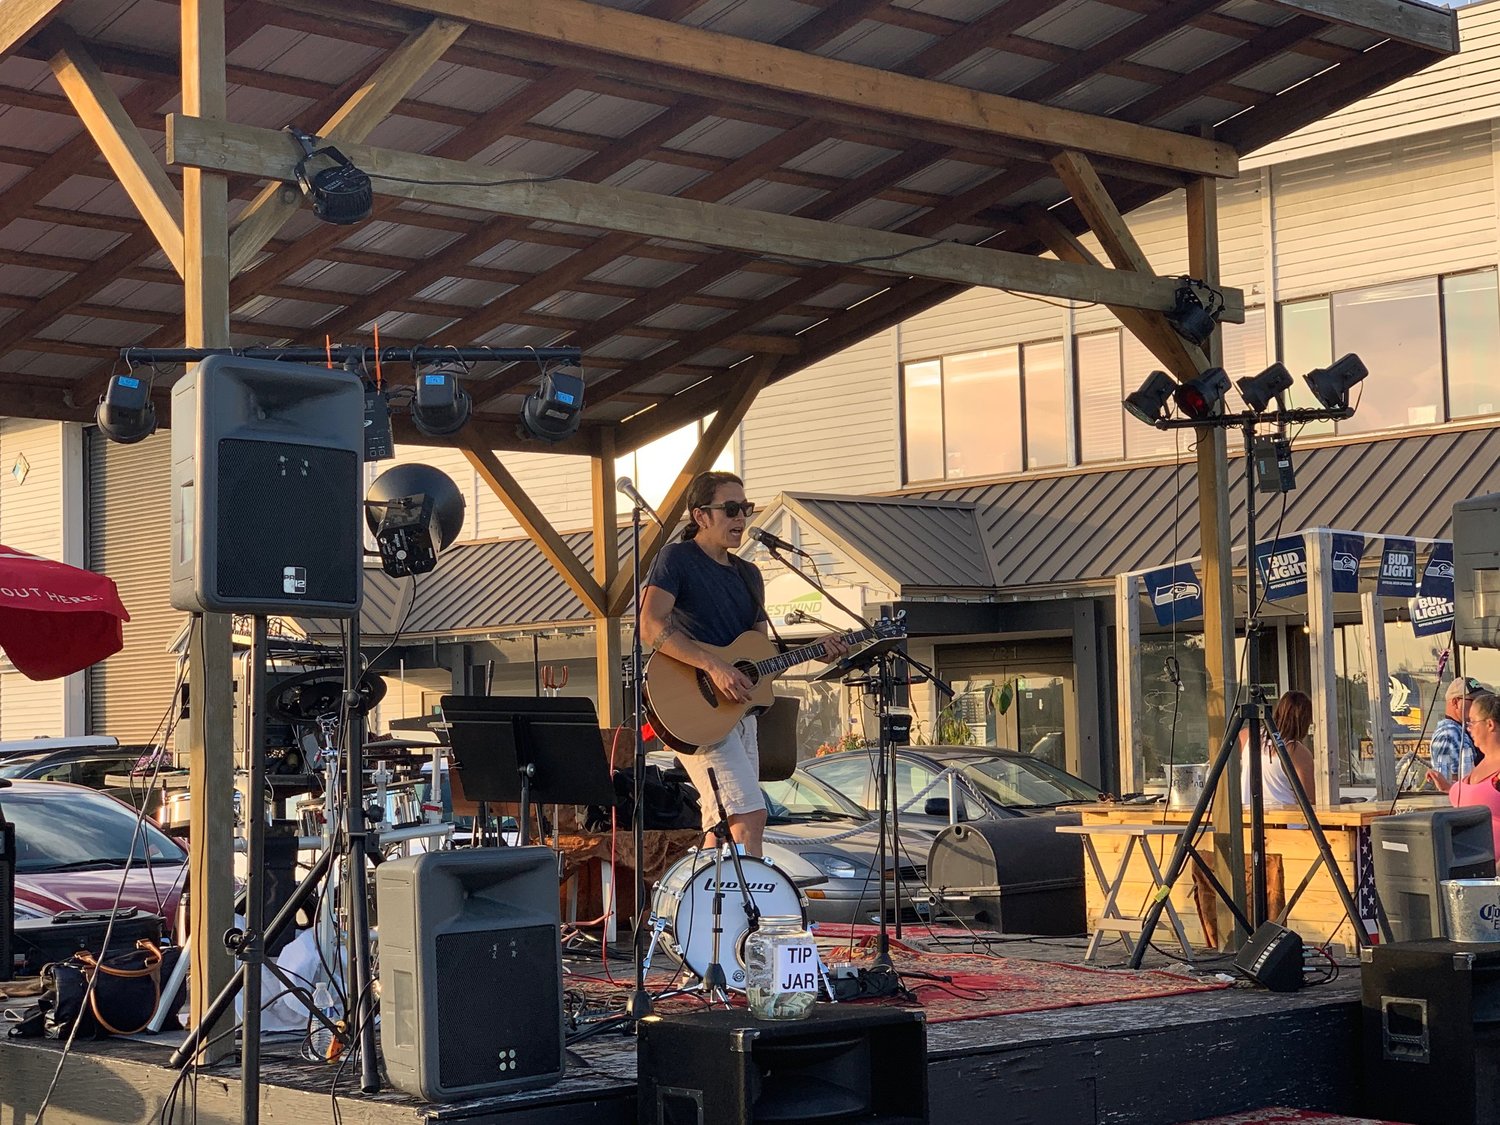 Mike Bell played live music for community members at the marina before the fireworks.